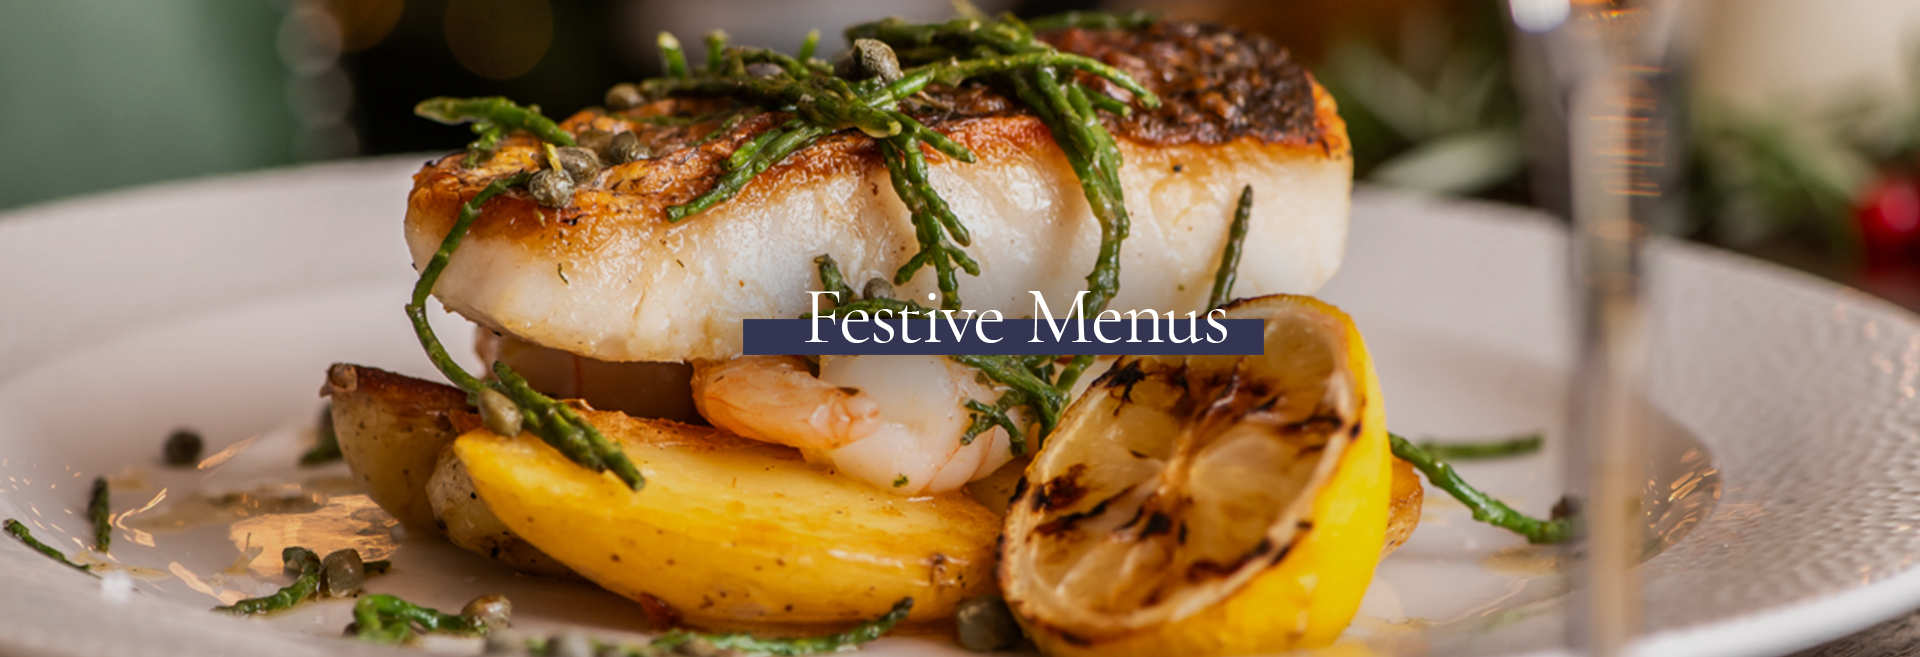 Festive Christmas Menu at The Queen's Arms 